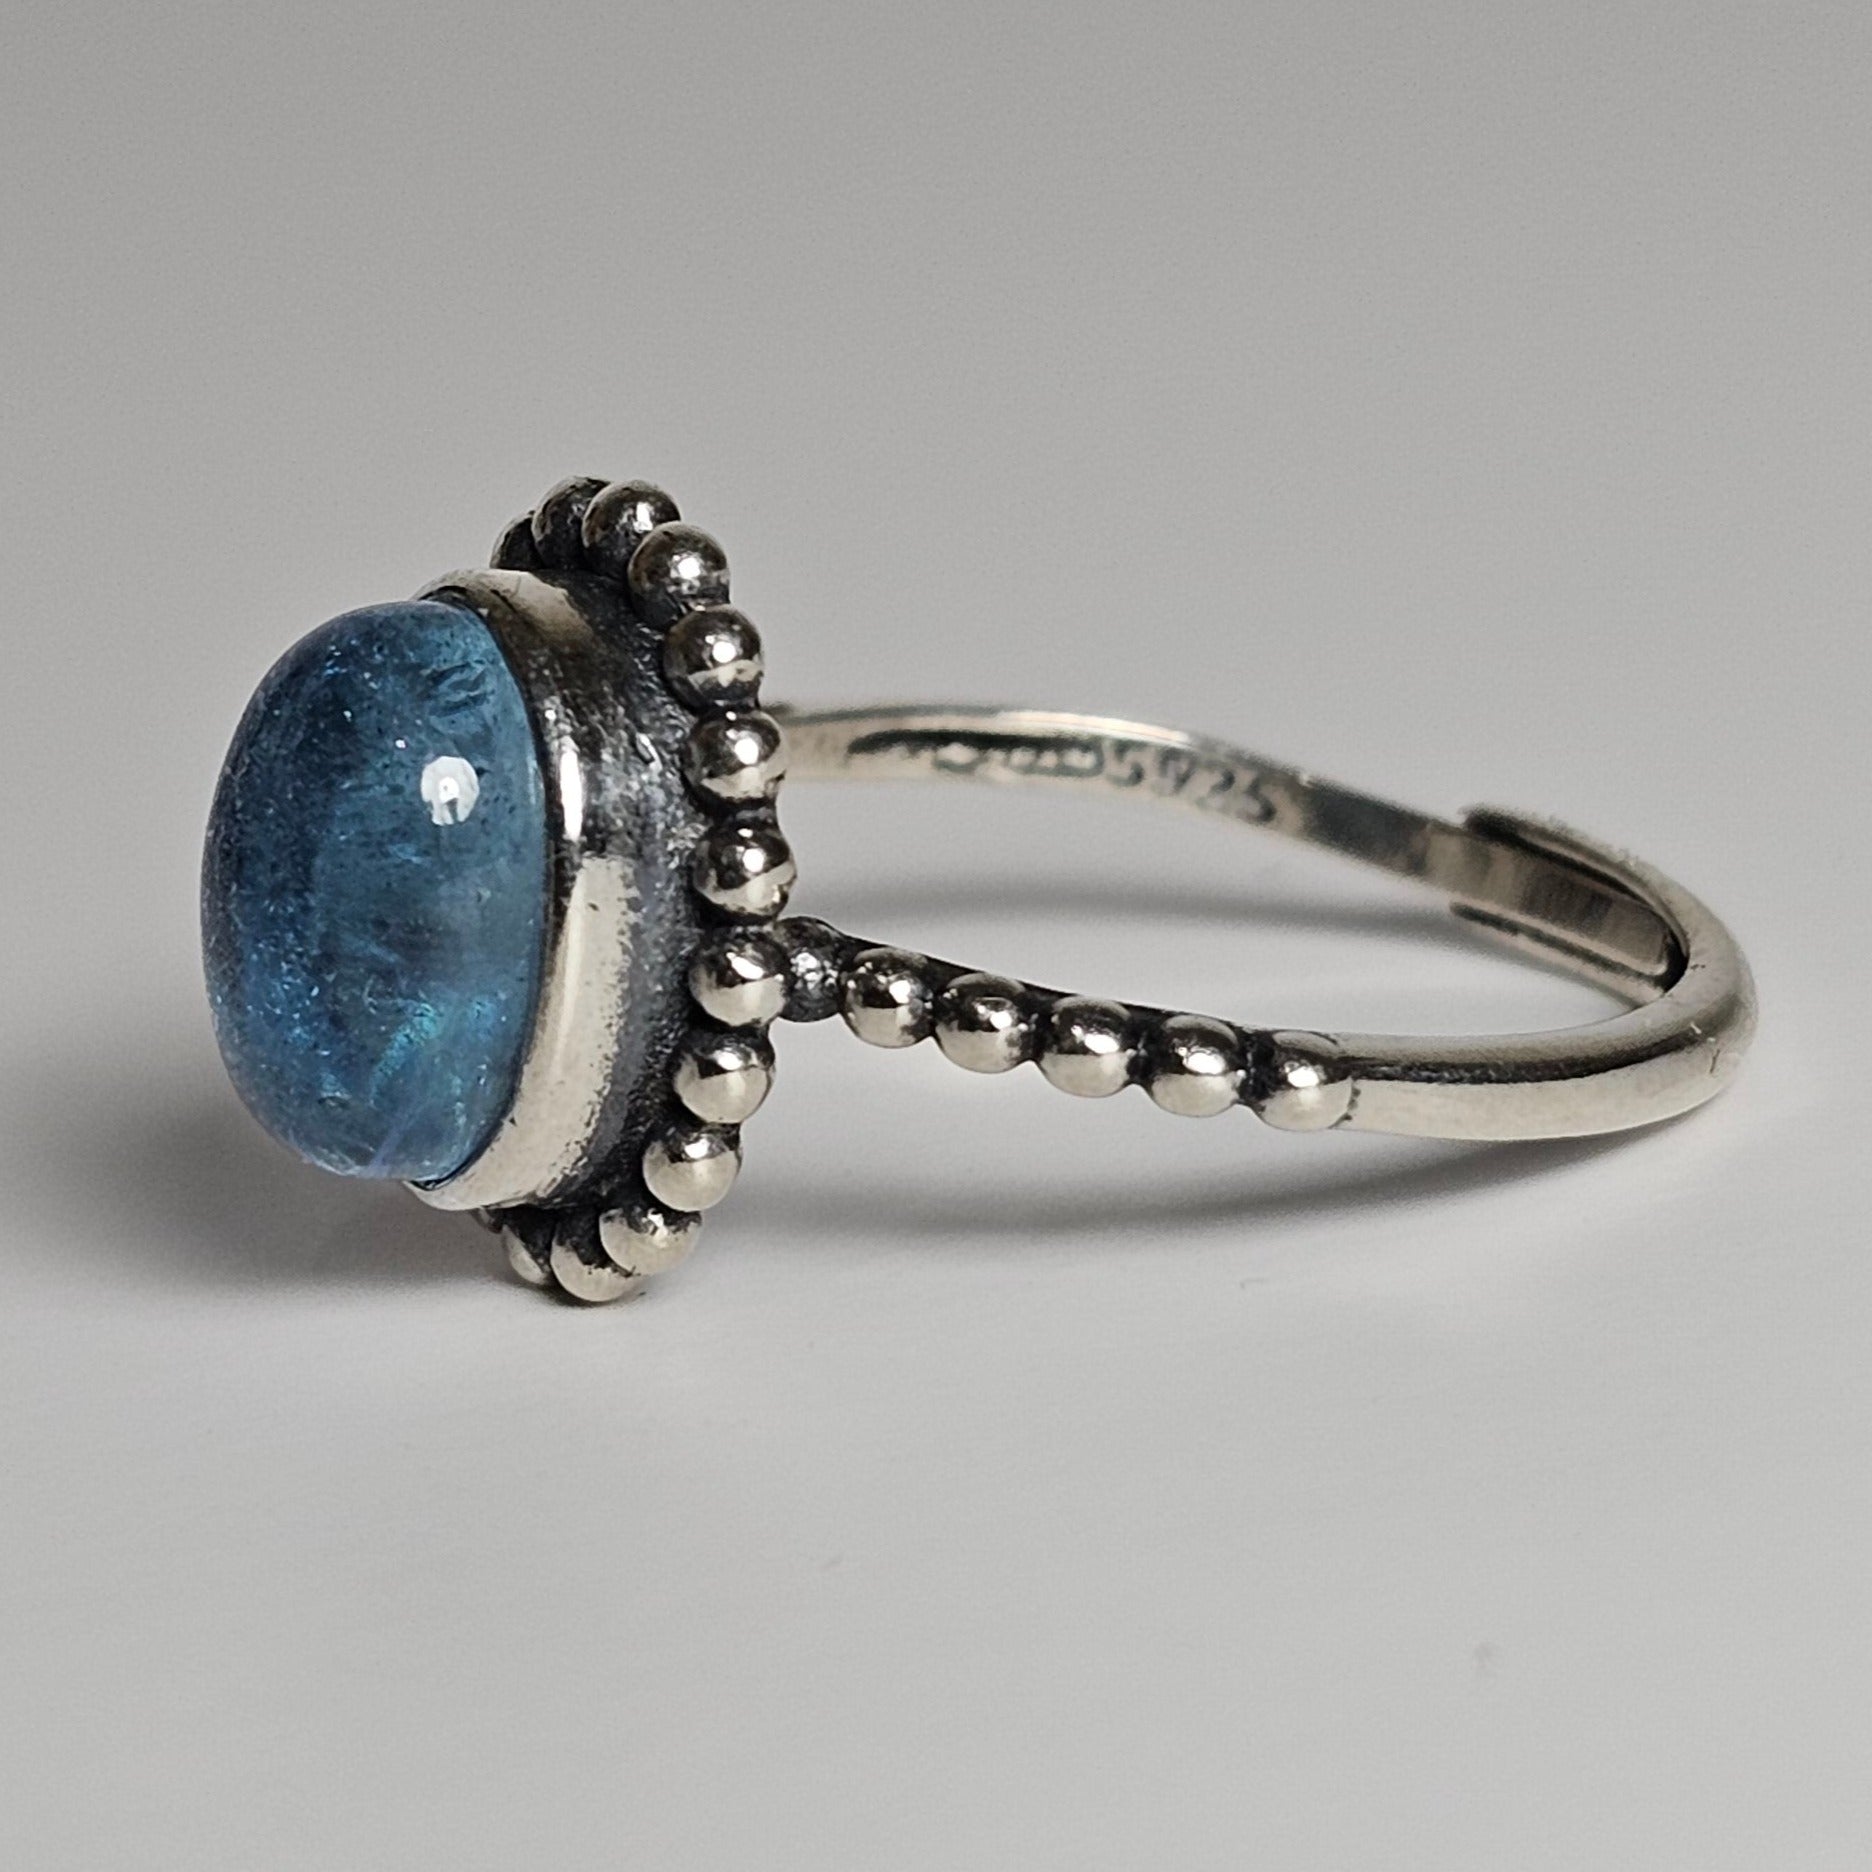 This adjustable ring is crafted from sterling silver and features a gorgeous oval Aquamarine stone on a beaded bezel, and beaded shoulder ring band.